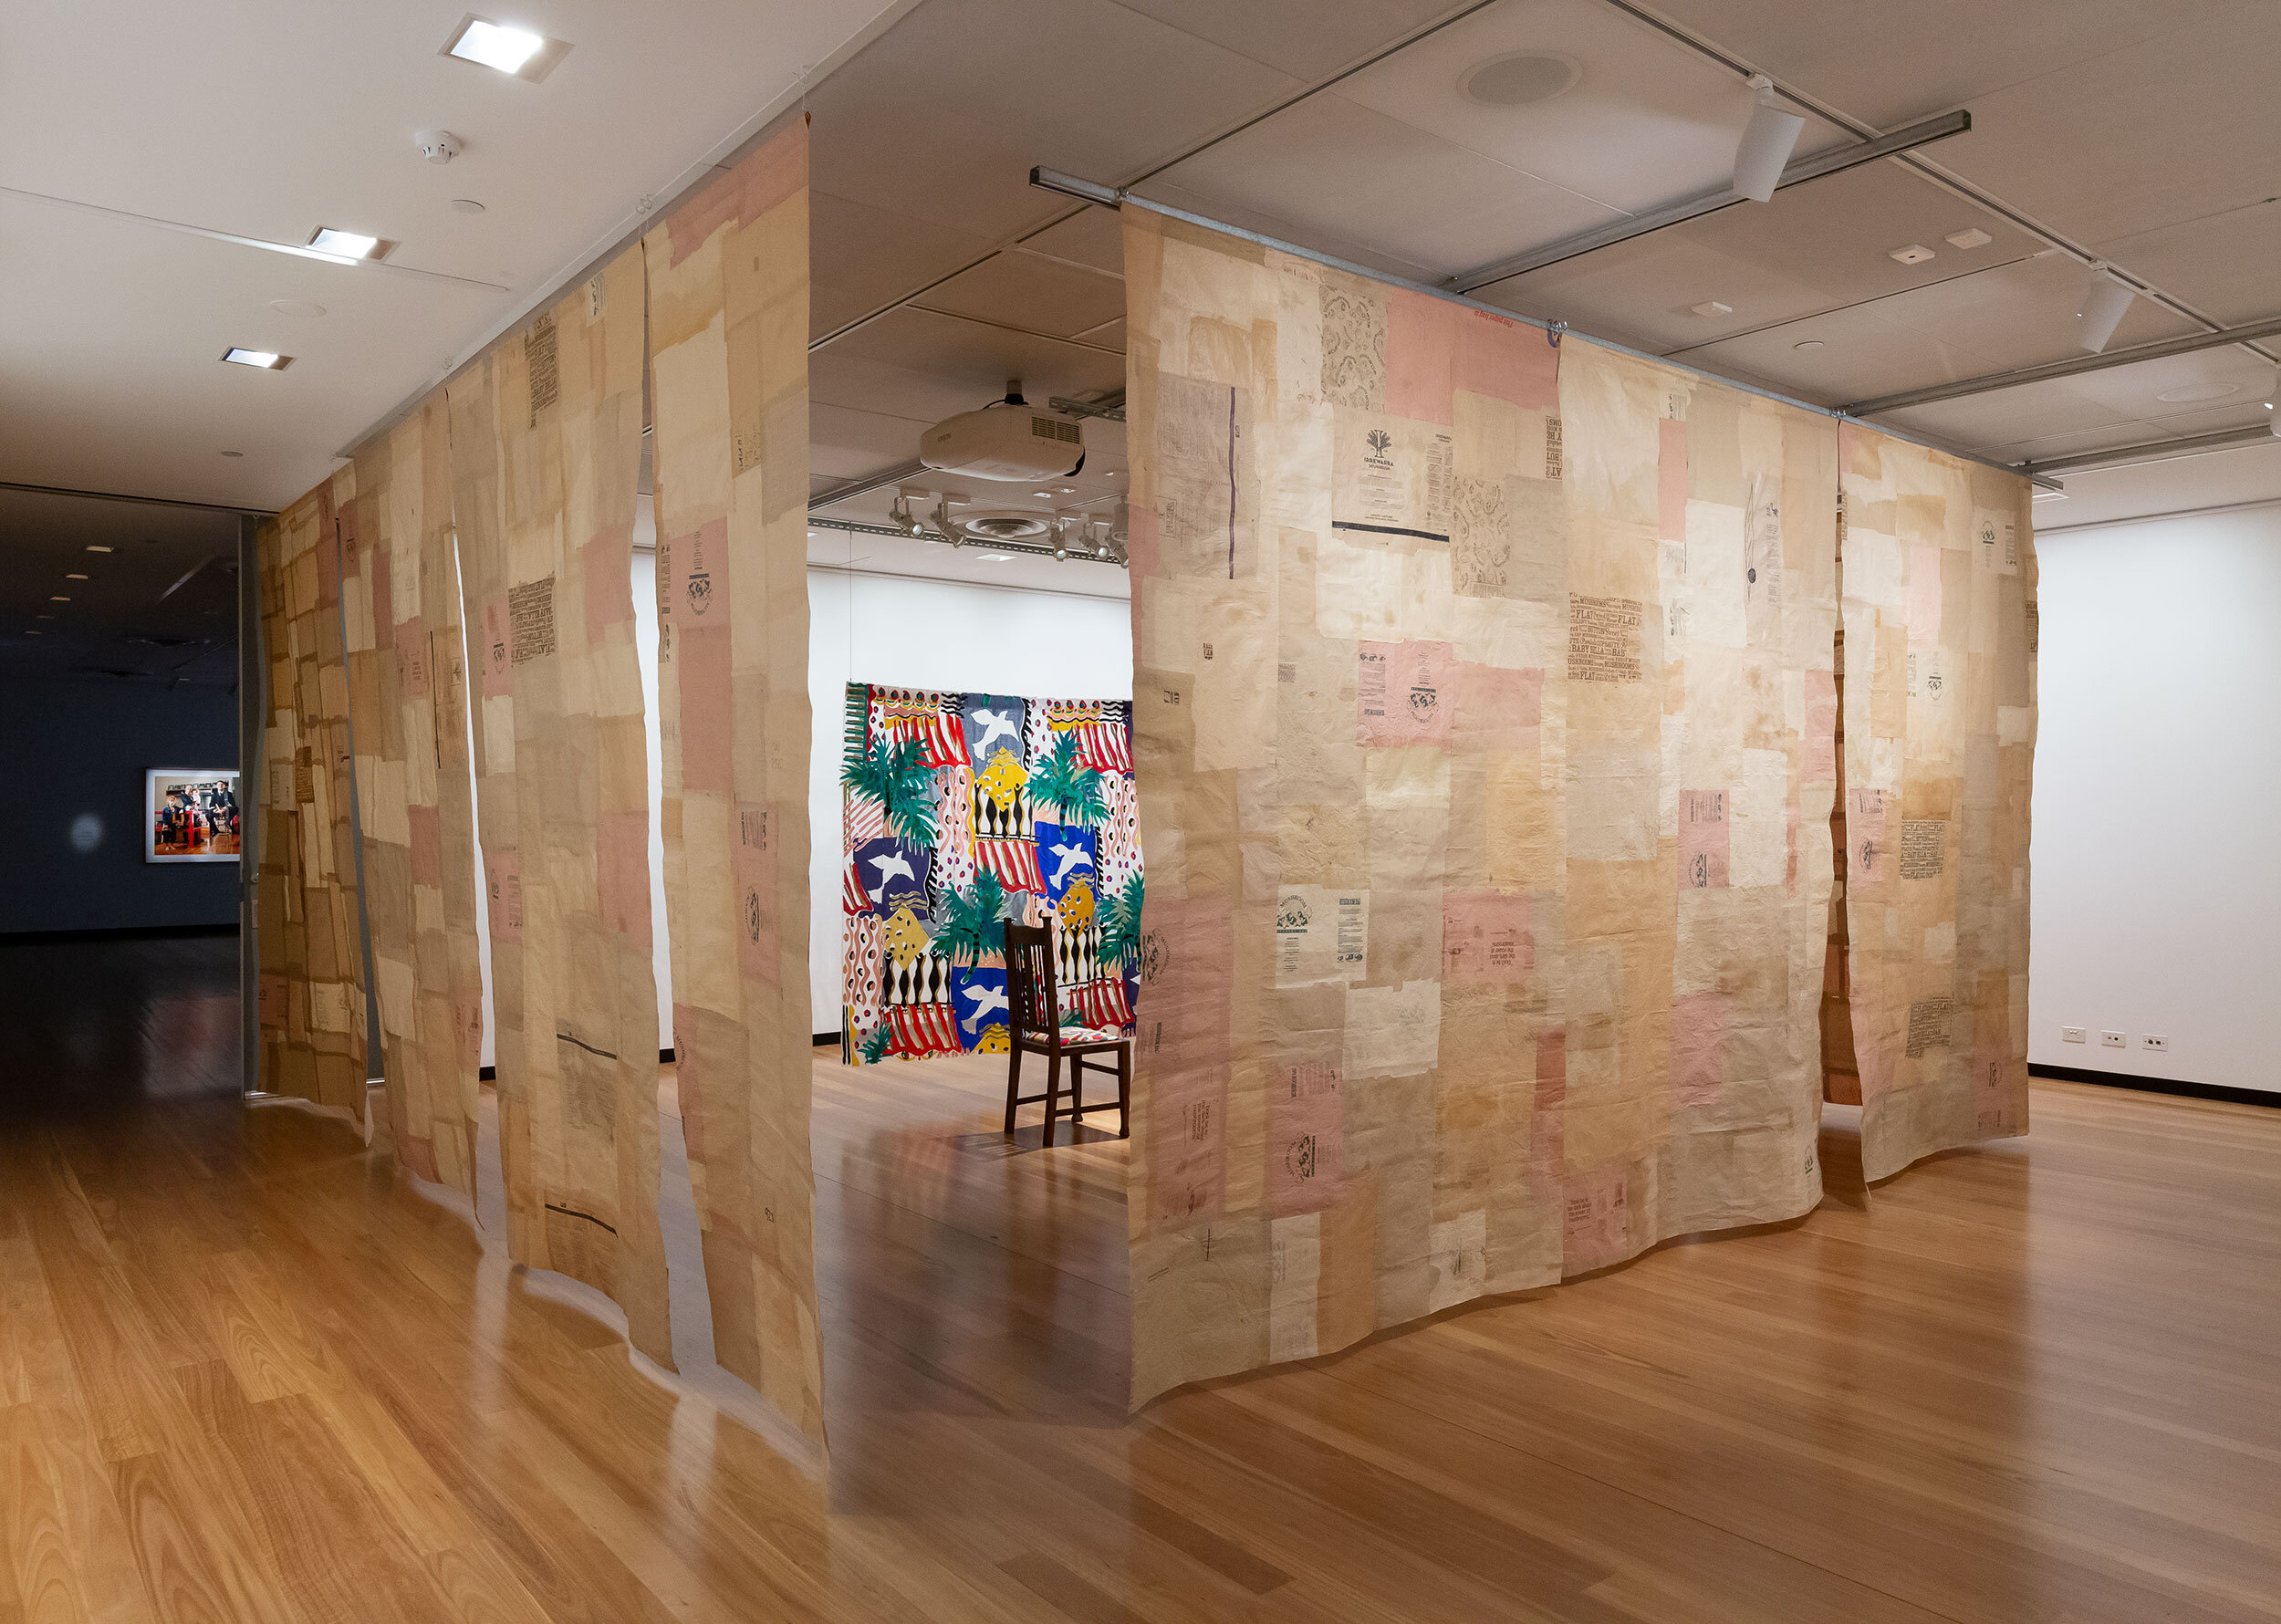   For Tim (1995-2008) , 2019-2020, 660 x 630 x 307cm, found paper bags, glue, found curtain and dining chair, wood, hessian, wood stain, varnish, silk organza fabric, found fabrics (wool, cotton, silk, synthetic), thread, curtain heading tape, framed